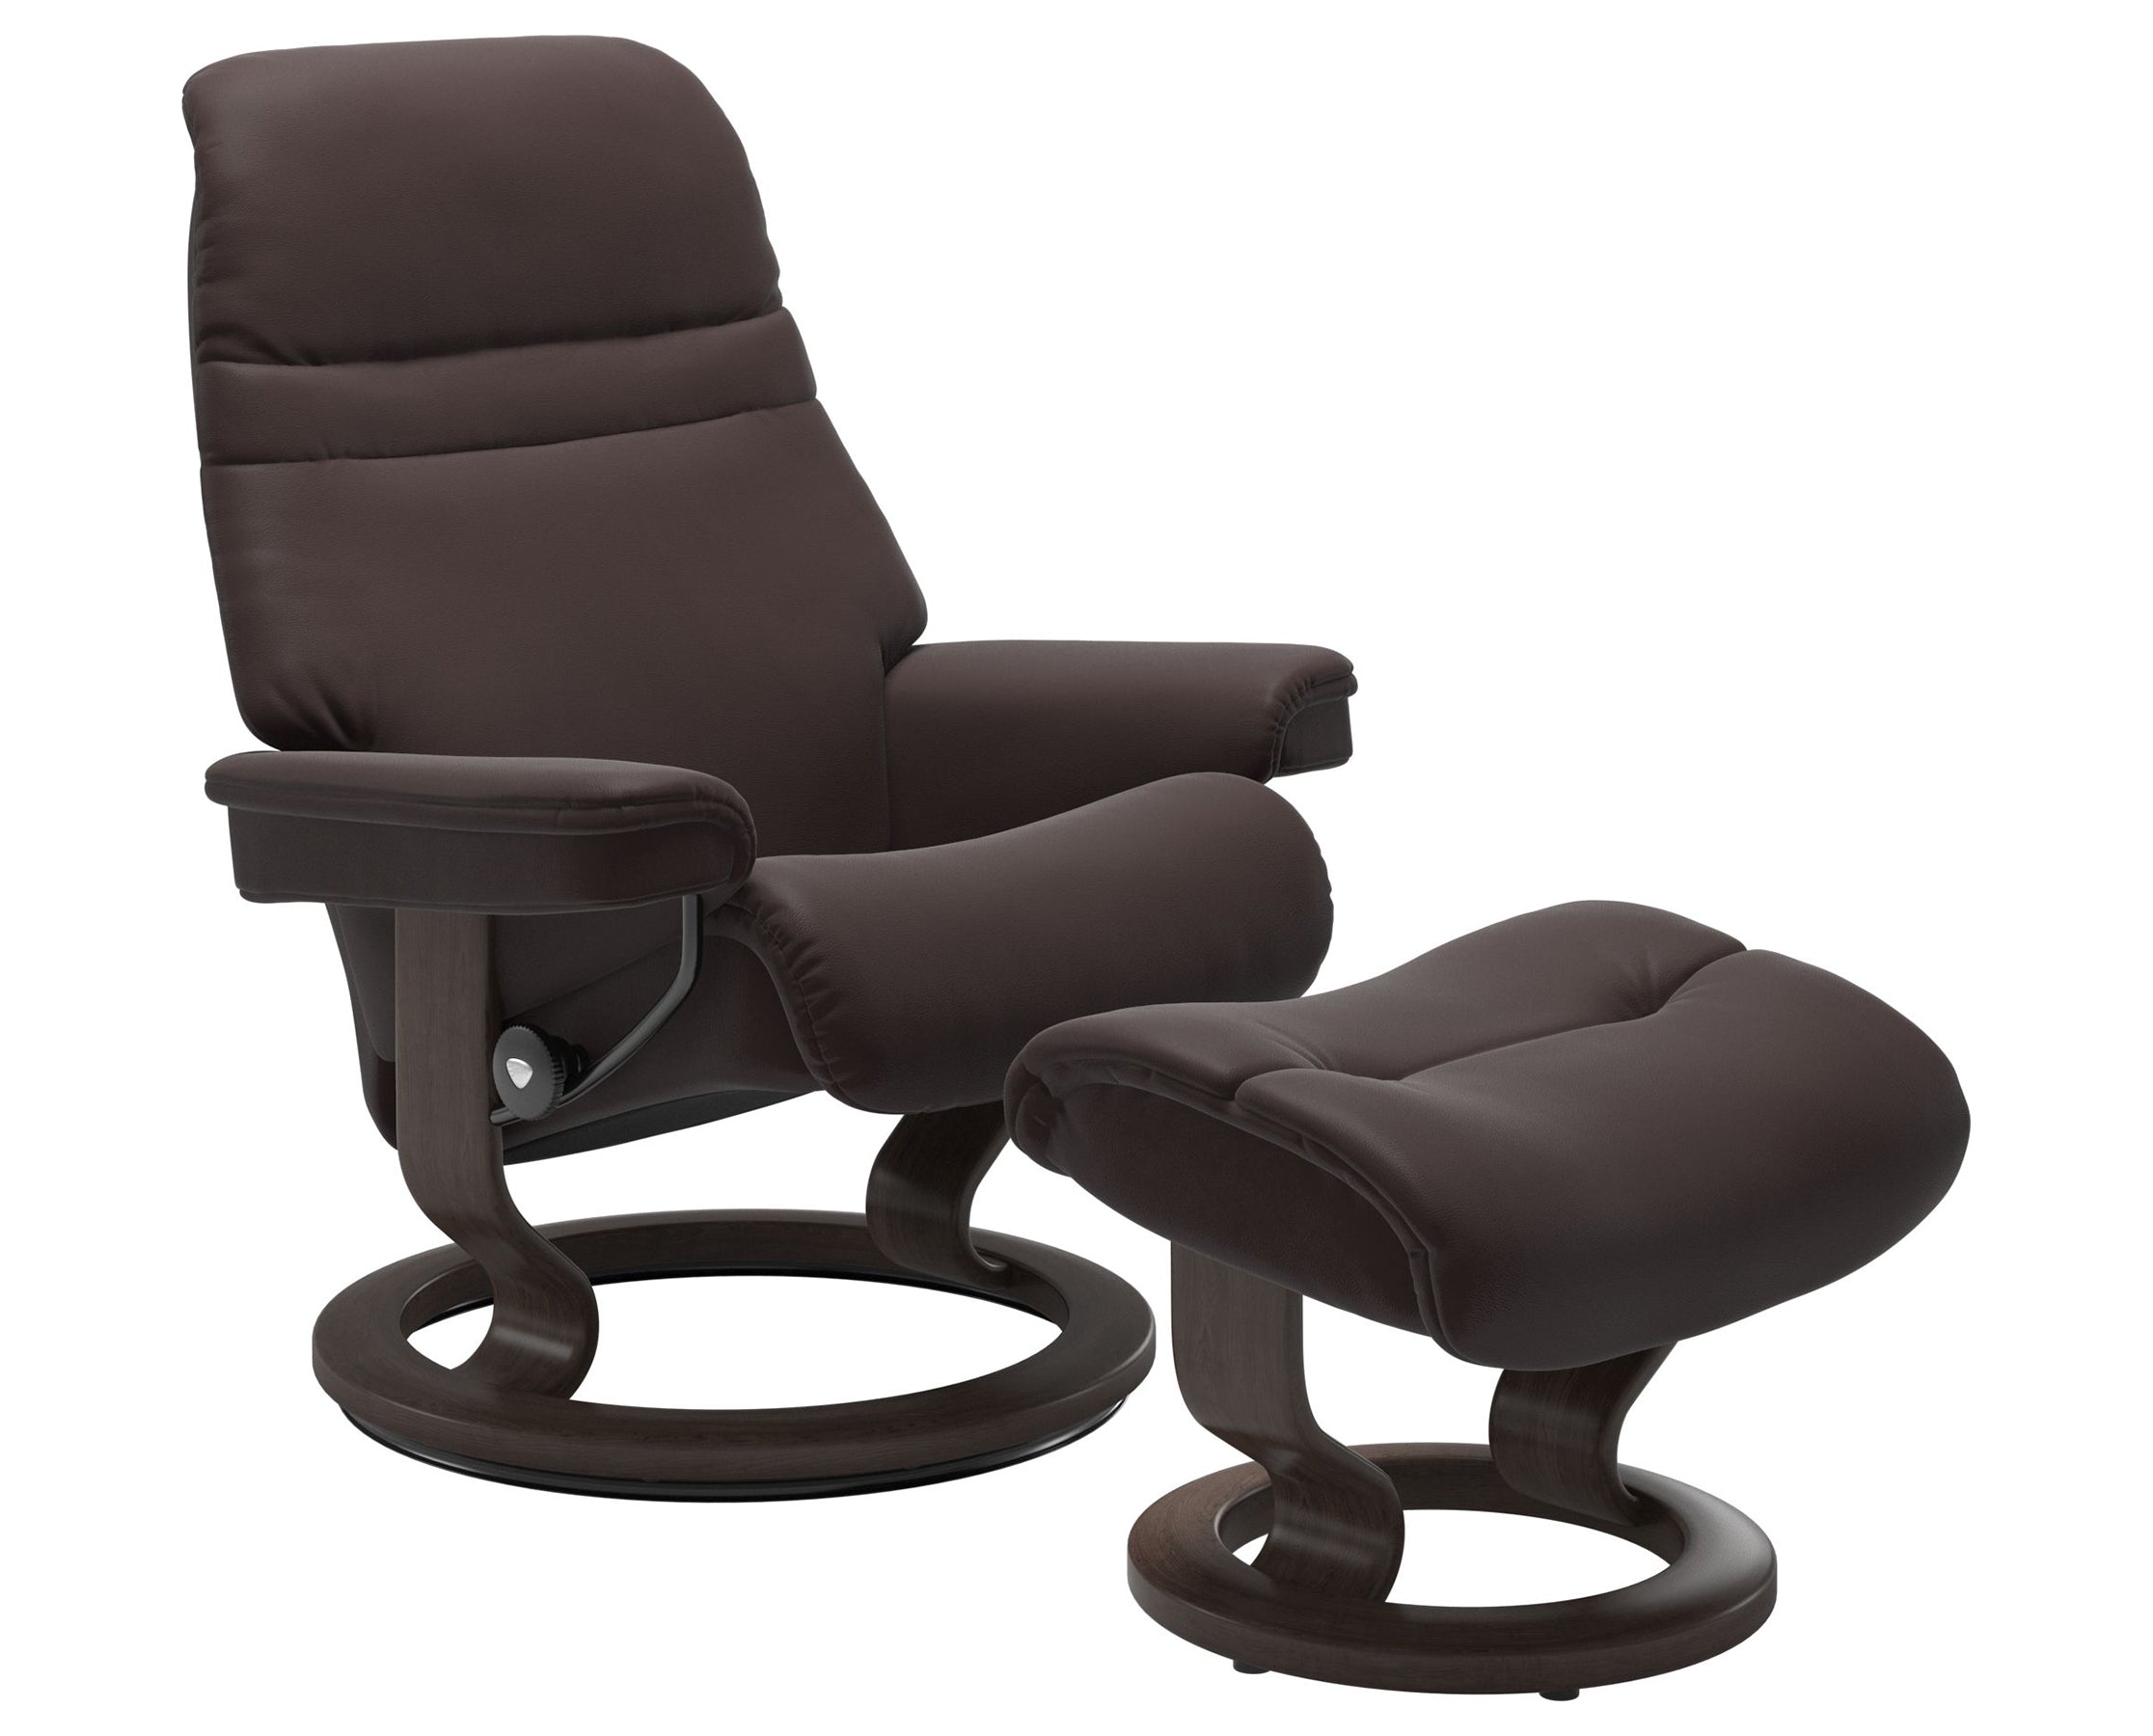 Paloma Leather Chocolate S/M/L and Wenge Base | Stressless Sunrise Classic Recliner | Valley Ridge Furniture